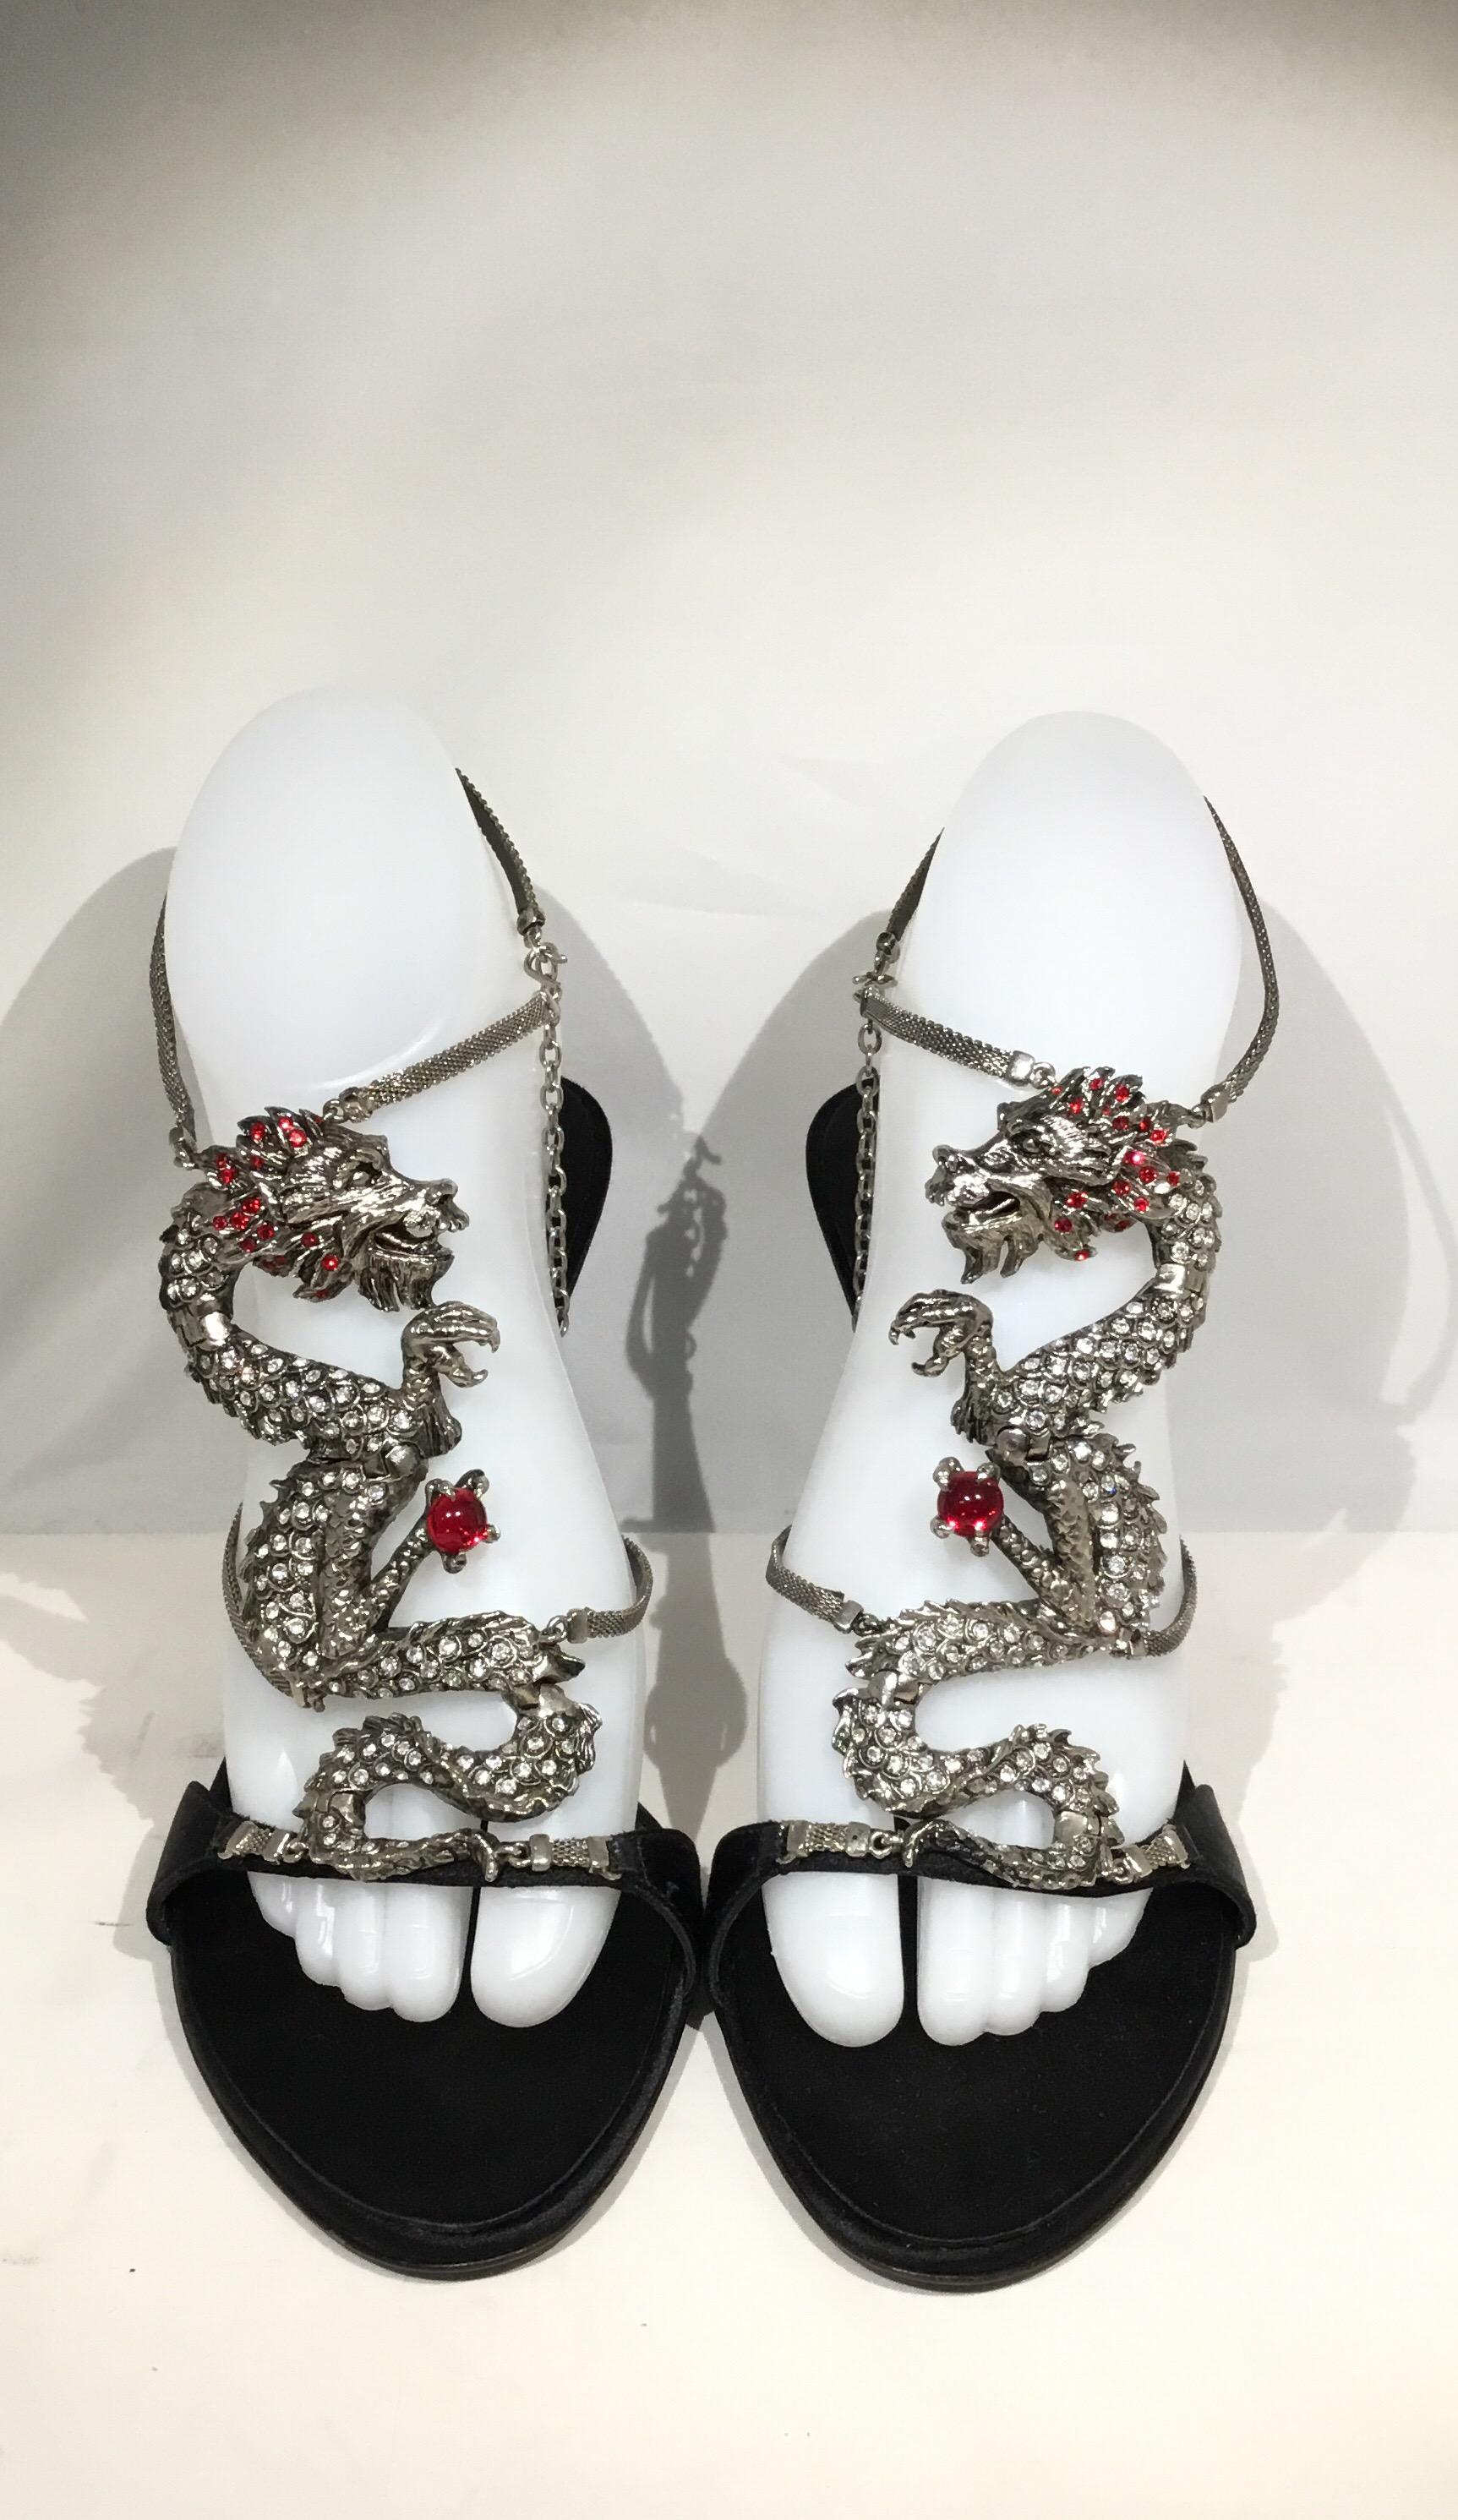 Giuseppe Zanotti Heels features an open toe style, a silver-tone Metal dragon detail encrusted with rhinestones and a red jewel. Heels have satin insoles, leather soles, an adjustable hook chain closure, and a 4-inch heel. 

Size 9 B, made in Italy.